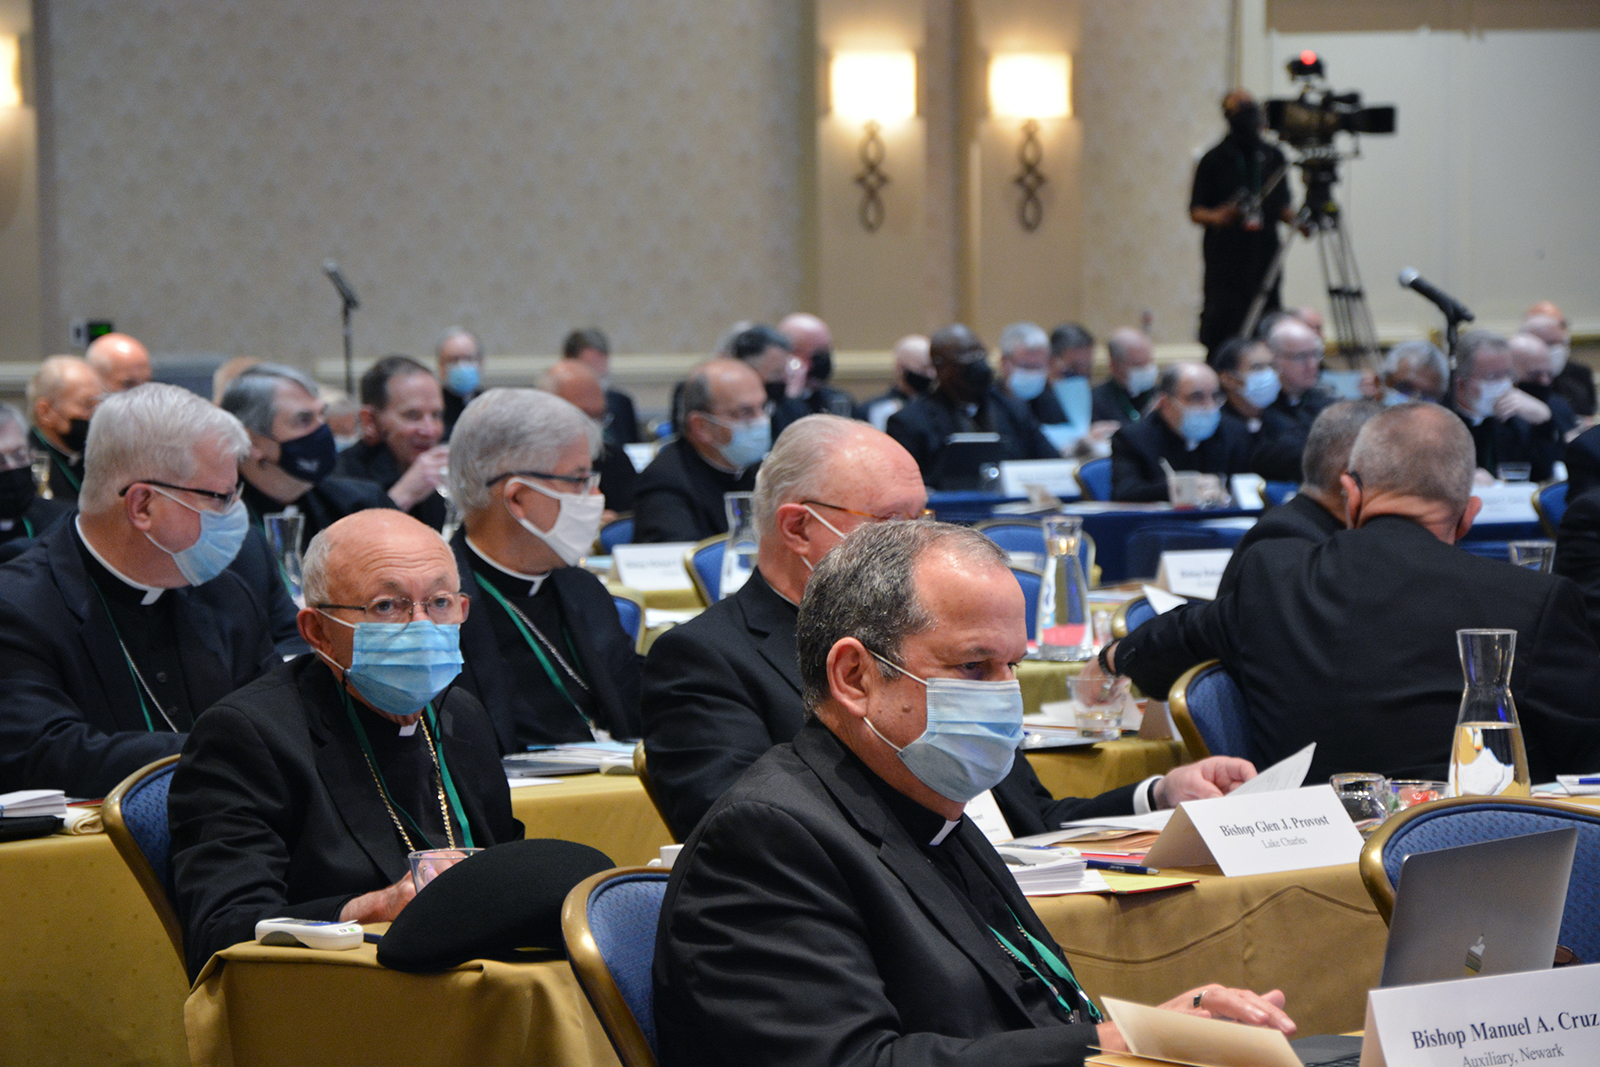 The United States Conference of Catholic Bishops holds its Fall General Assembly meeting, Tuesday, Nov. 16, 2021, in Baltimore. RNS photo by Jack Jenkins